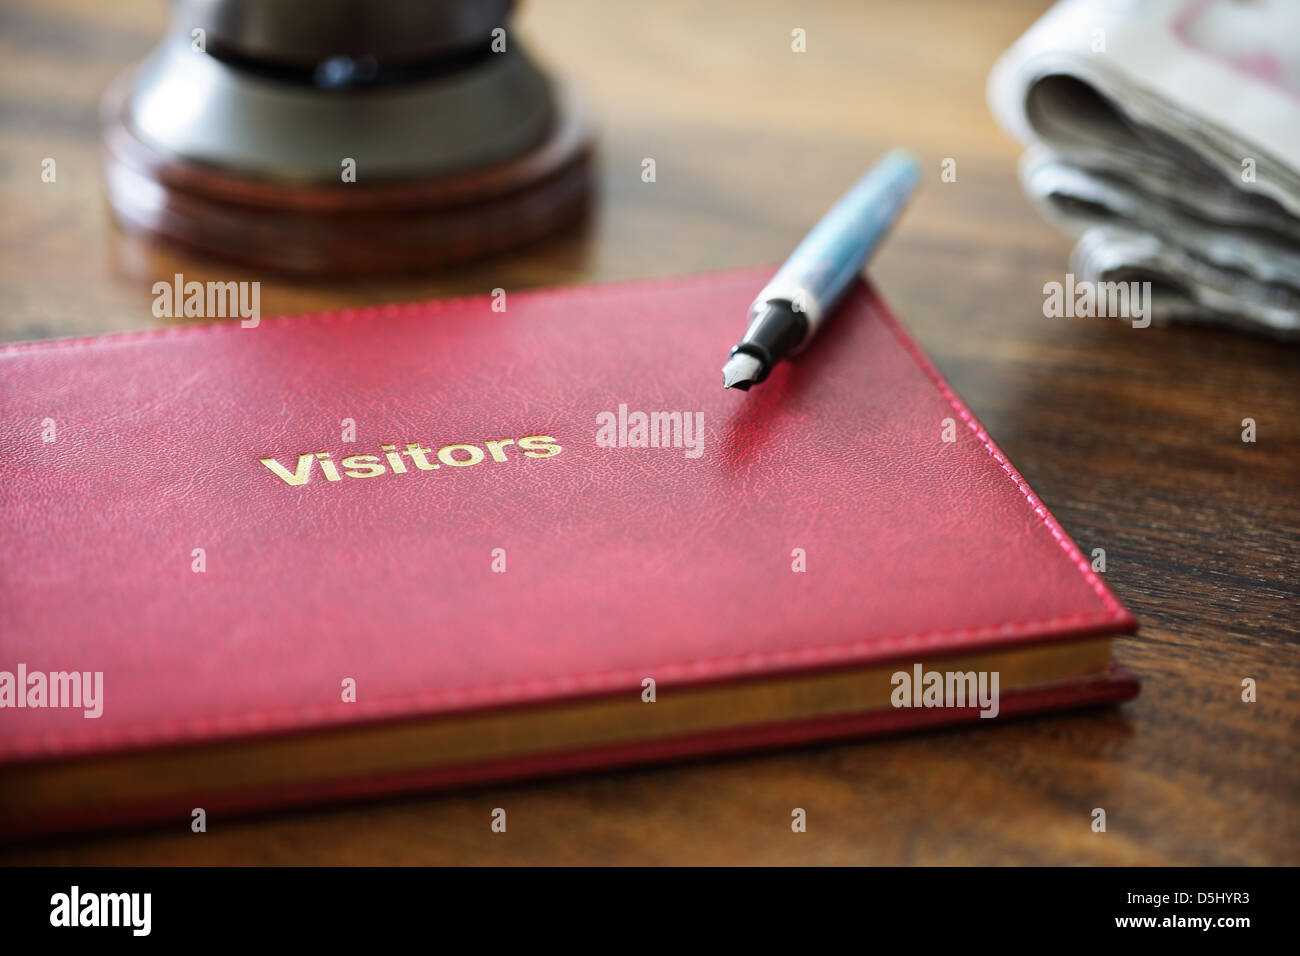 Hotel guest book Stock Photo